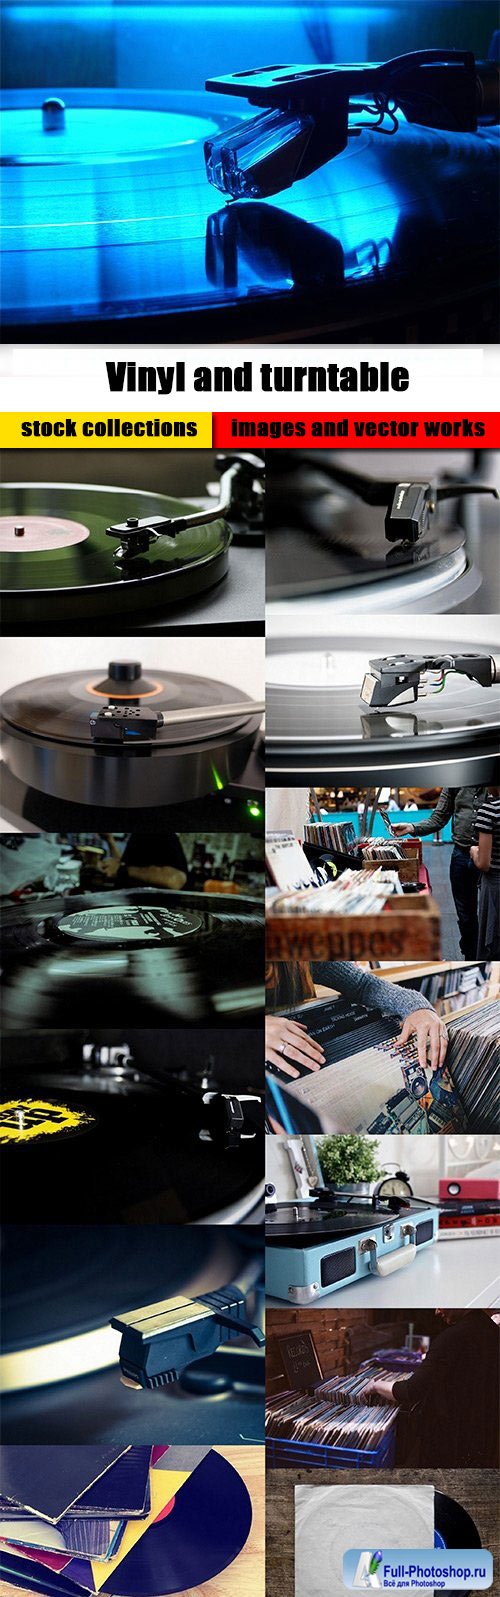 Vinyl and turntable